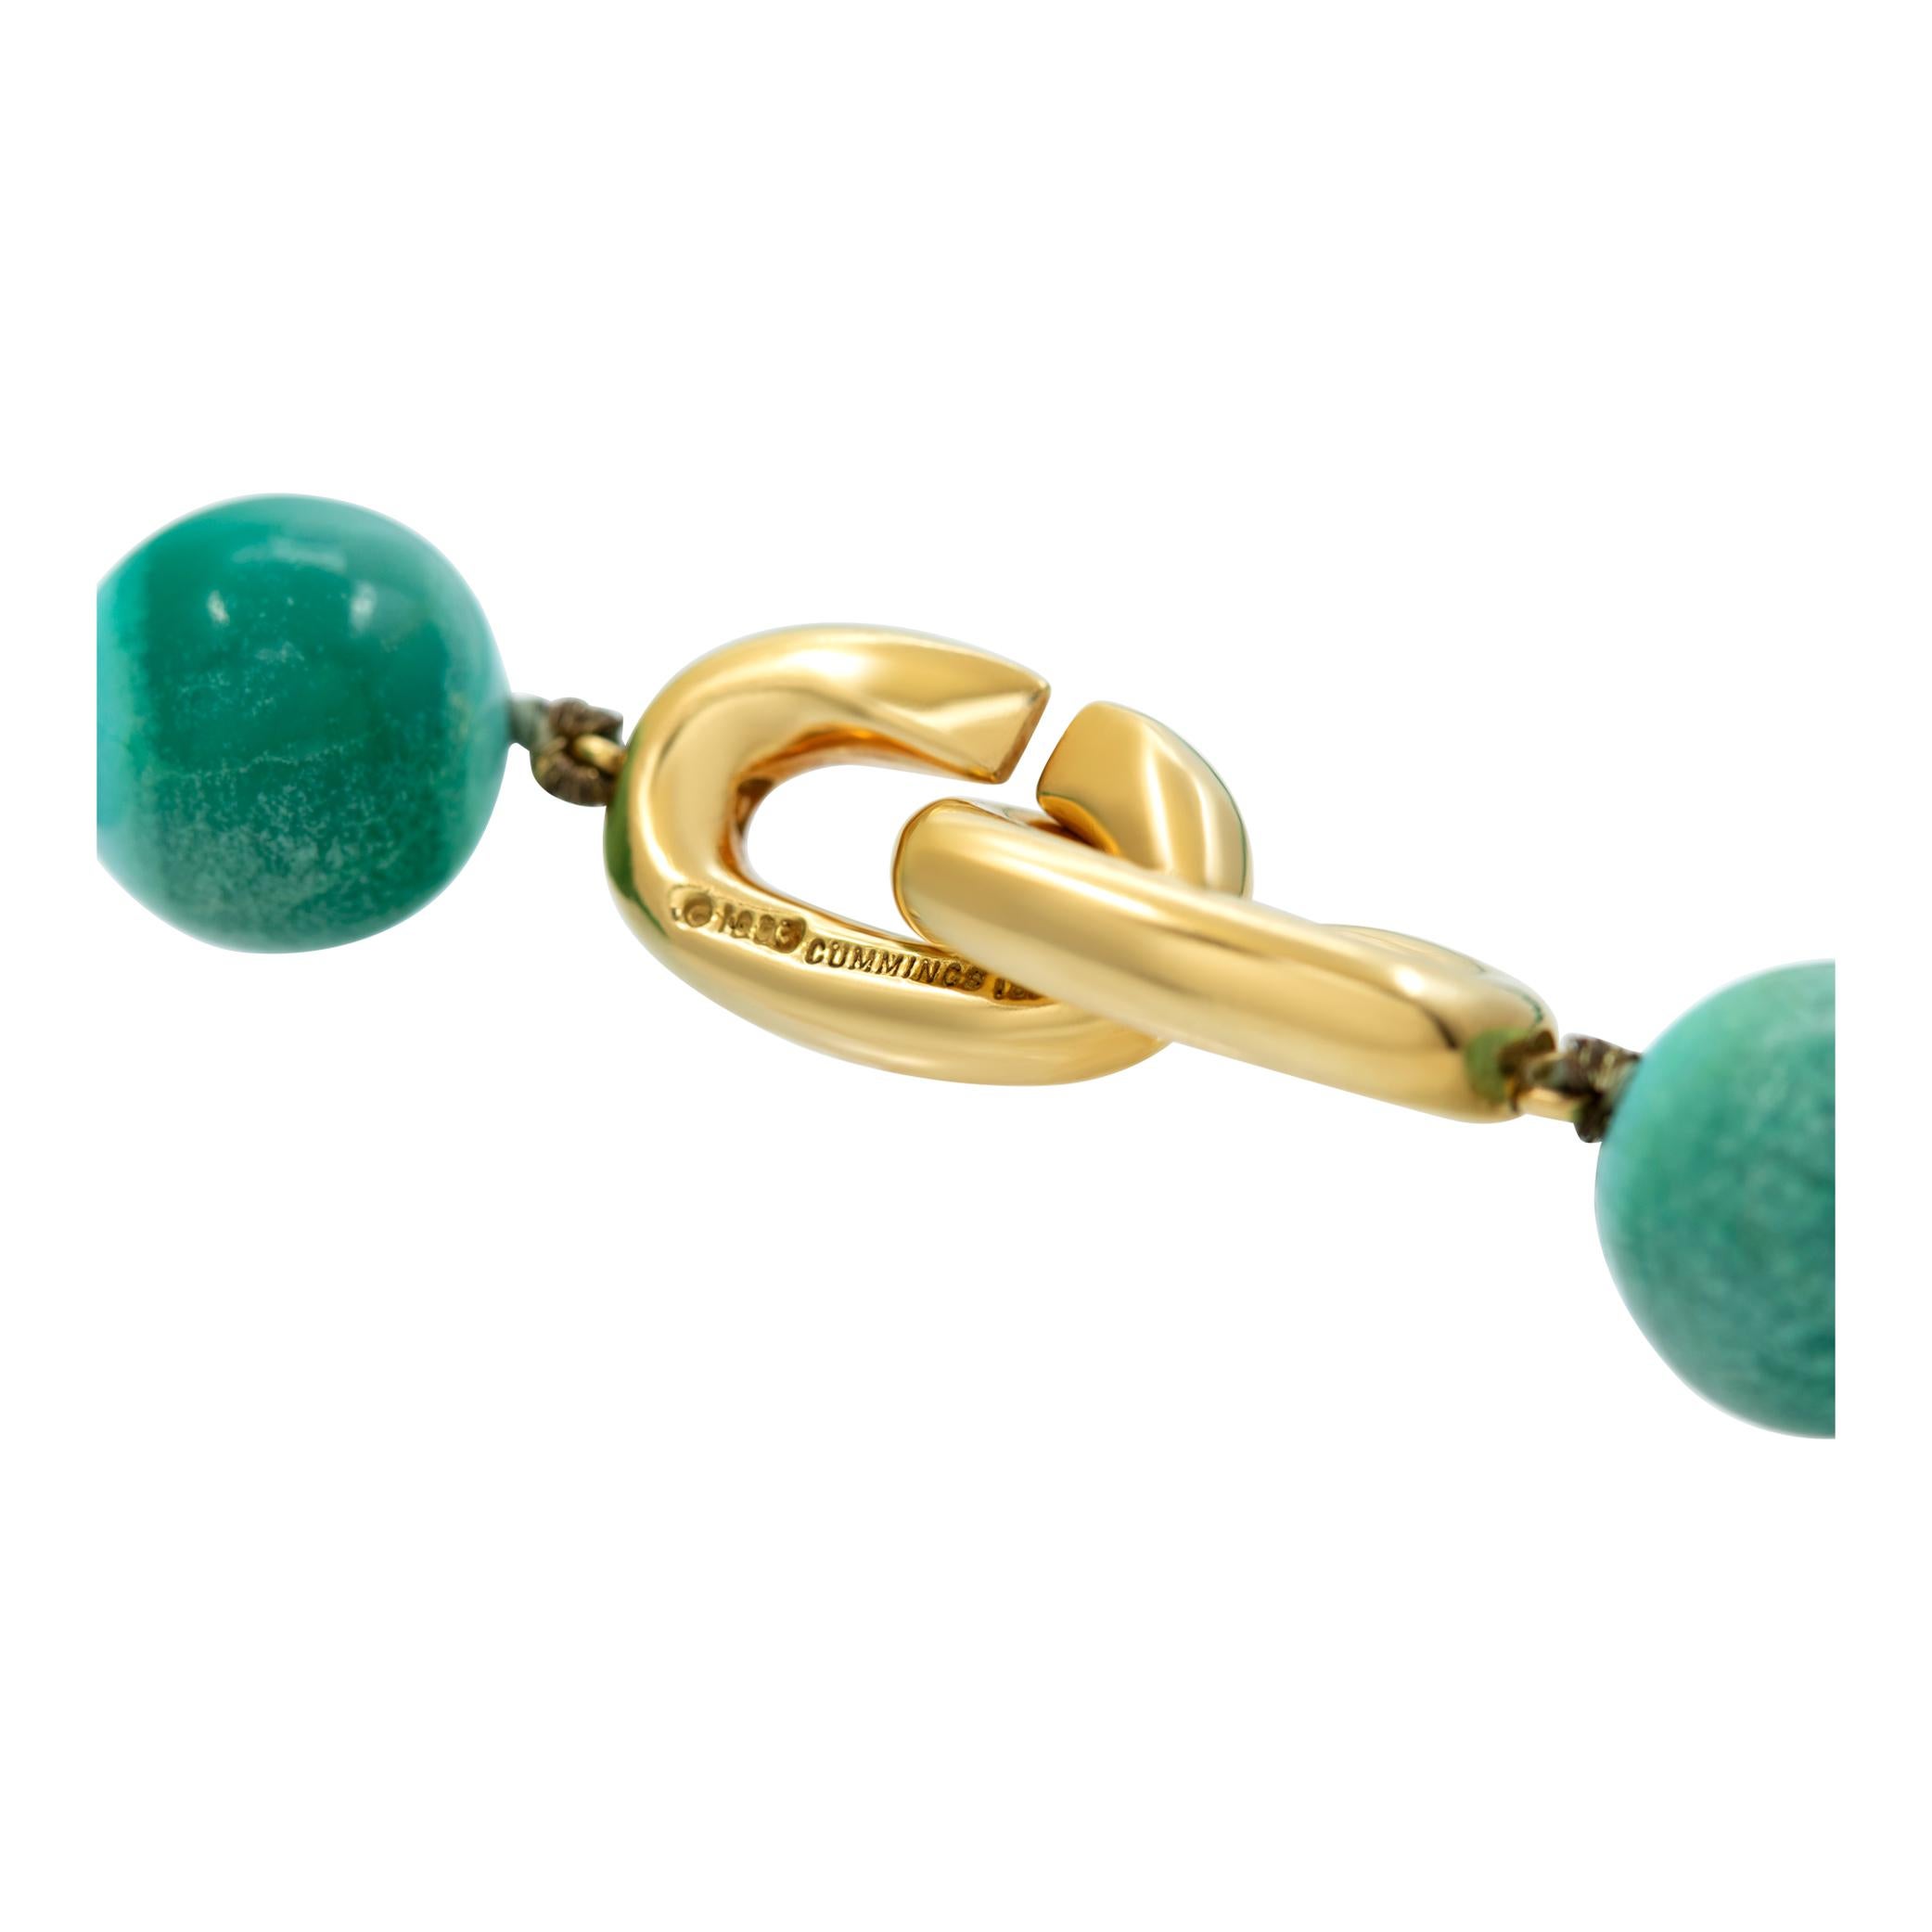 Women's Angela Cummings Turquoise Bead Necklace with yellow gold clasp